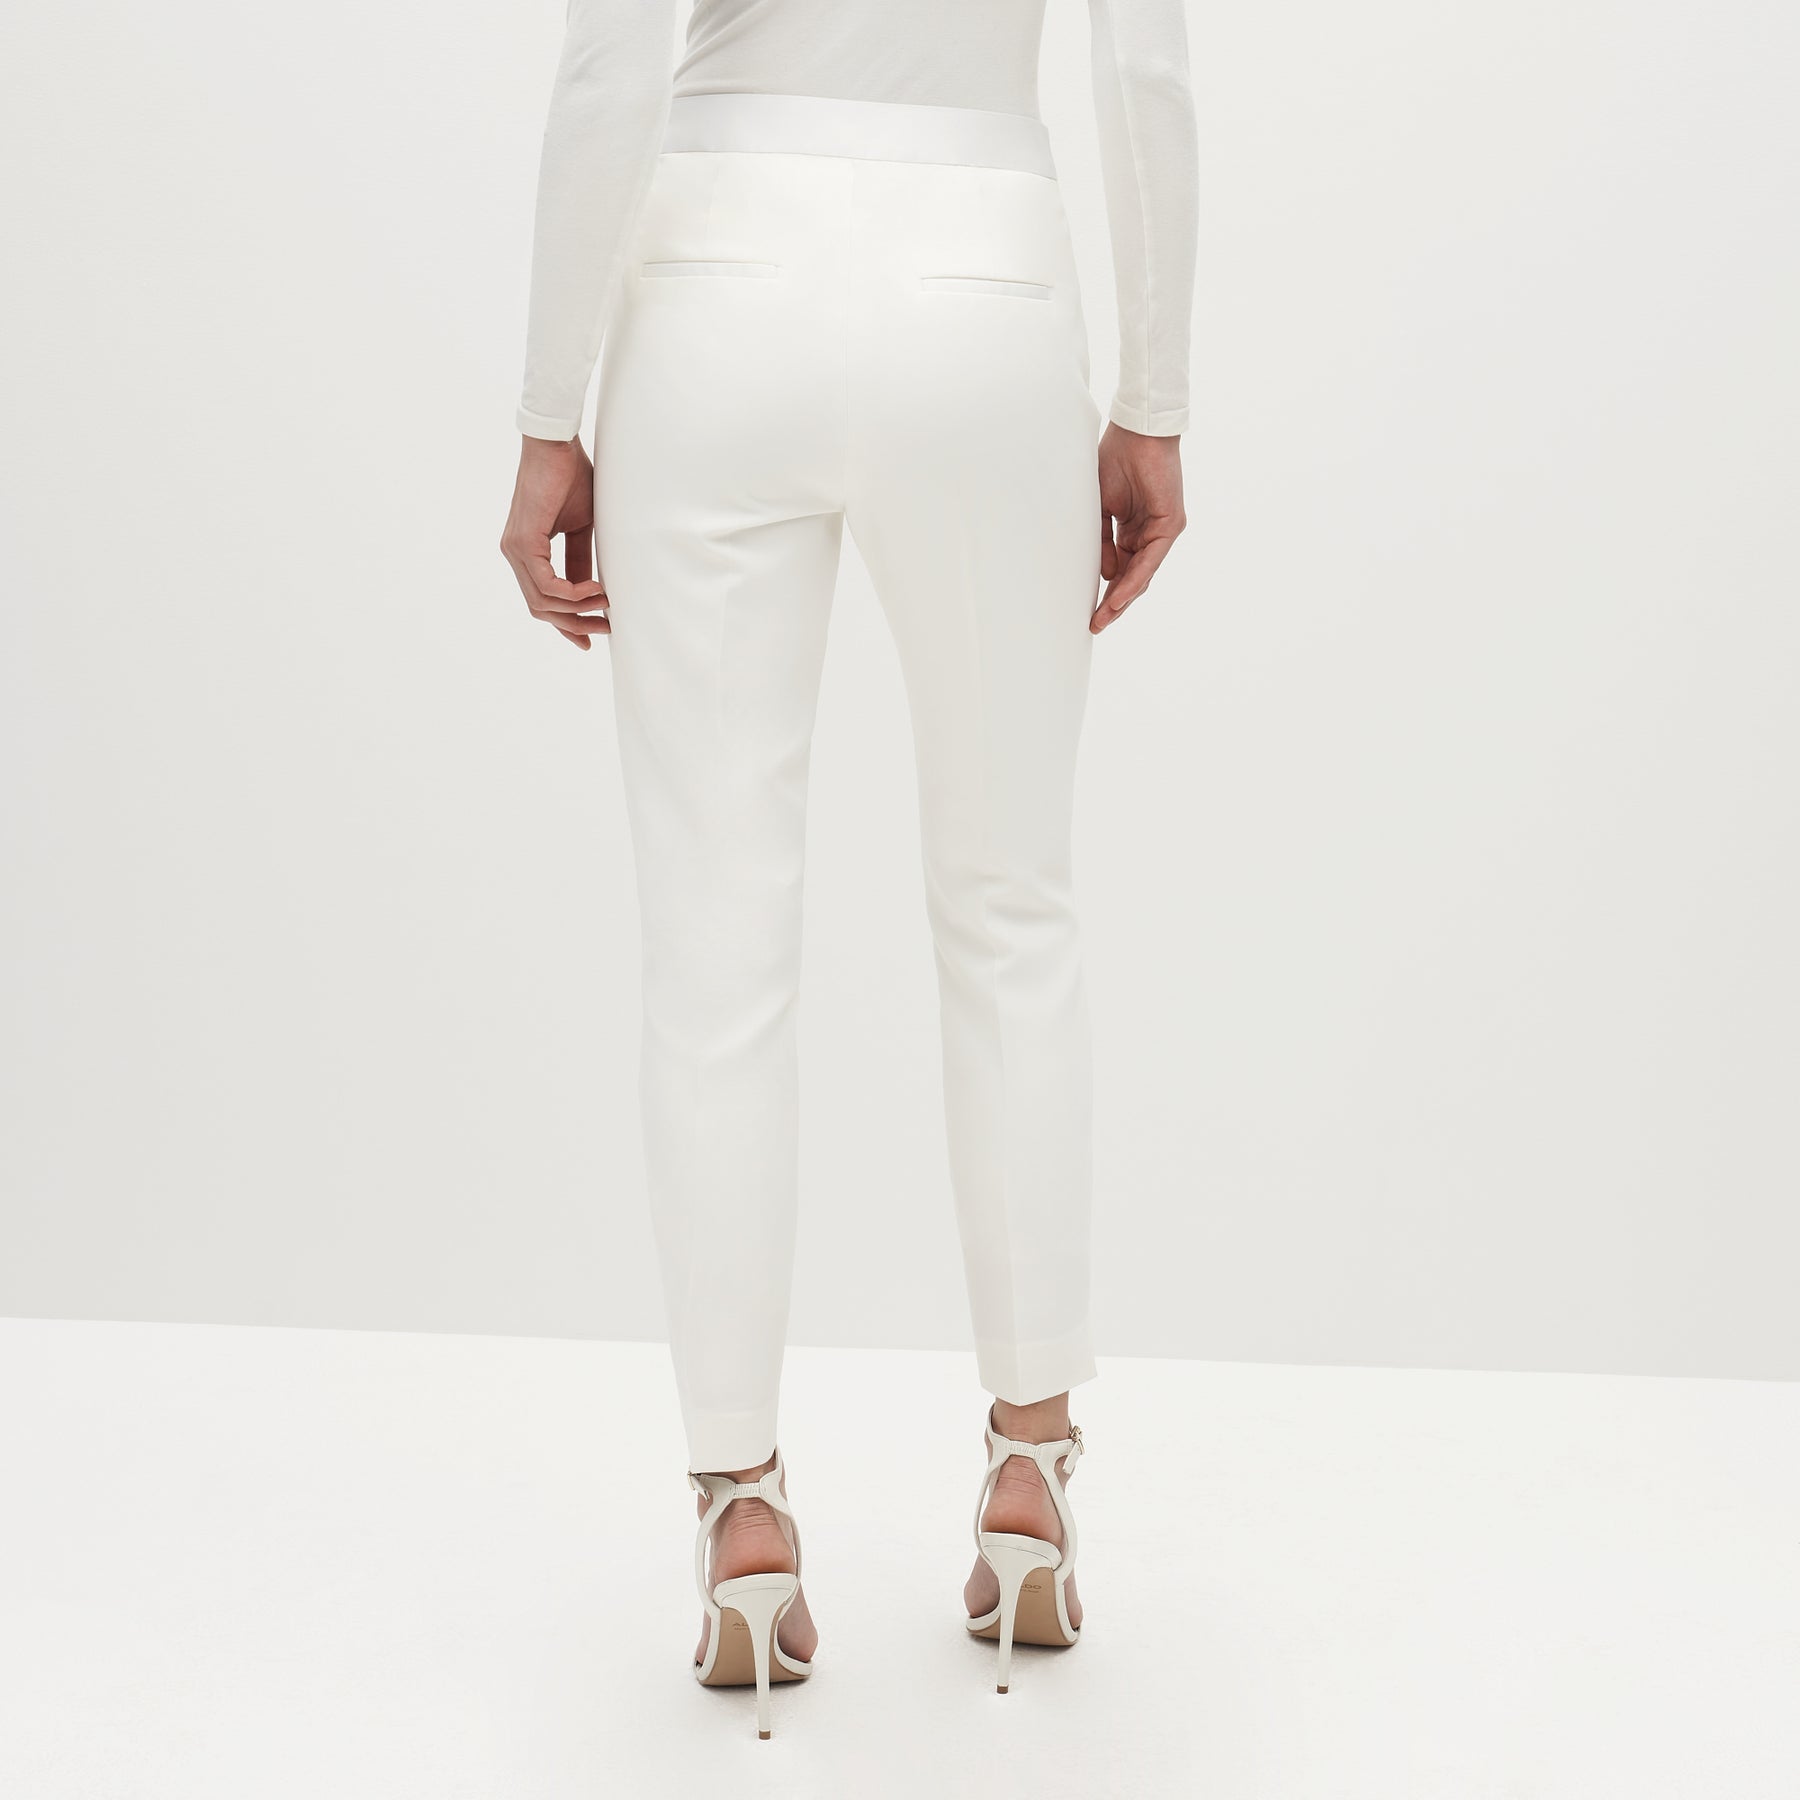 Women's White Tuxedo Pants | Suits for Weddings & Events